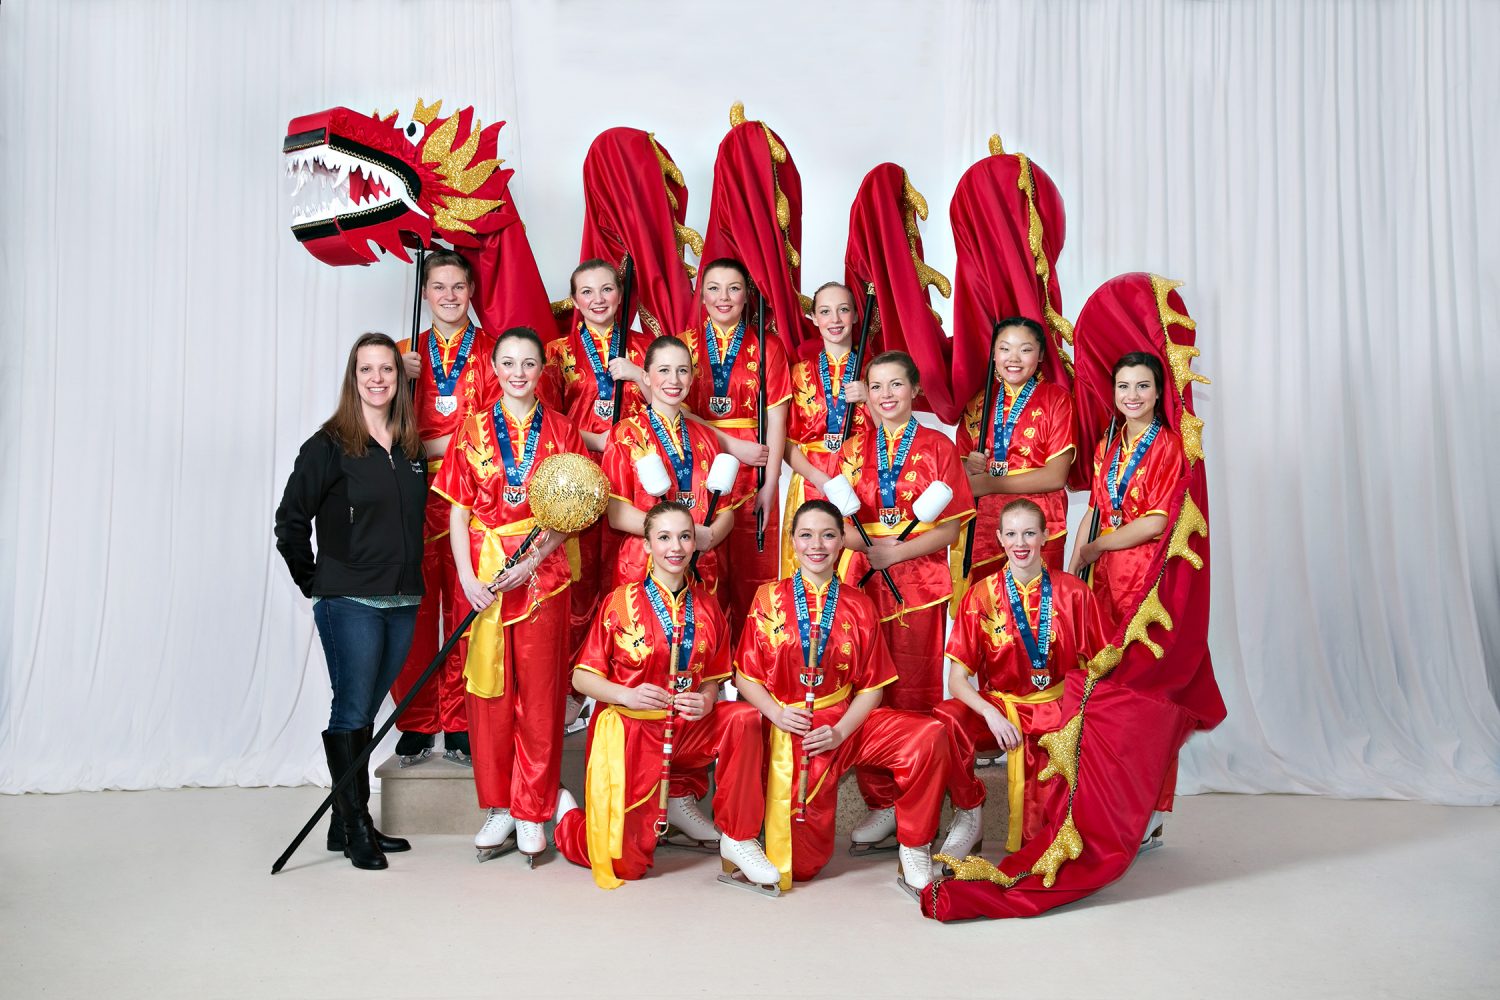 Gold Entertainment Team — "Chinese Dragon Dance" — Coached by Alysia Seliger, placed first out of four teams — Back row, left to right: Timothy Zupanc, Cassandra Kopf, Maddy Rogers, Jenna Schneider — Middle row: Coach Alysia Seliger, Katie Leick, Ashley Cherney, Claire Schecklman, Caitlyn Christensen, Mariah Nelles — Kneeling: Laurel Siegel, Jenna Asplin, Hanah Gadke. (Paul Tishim photo)